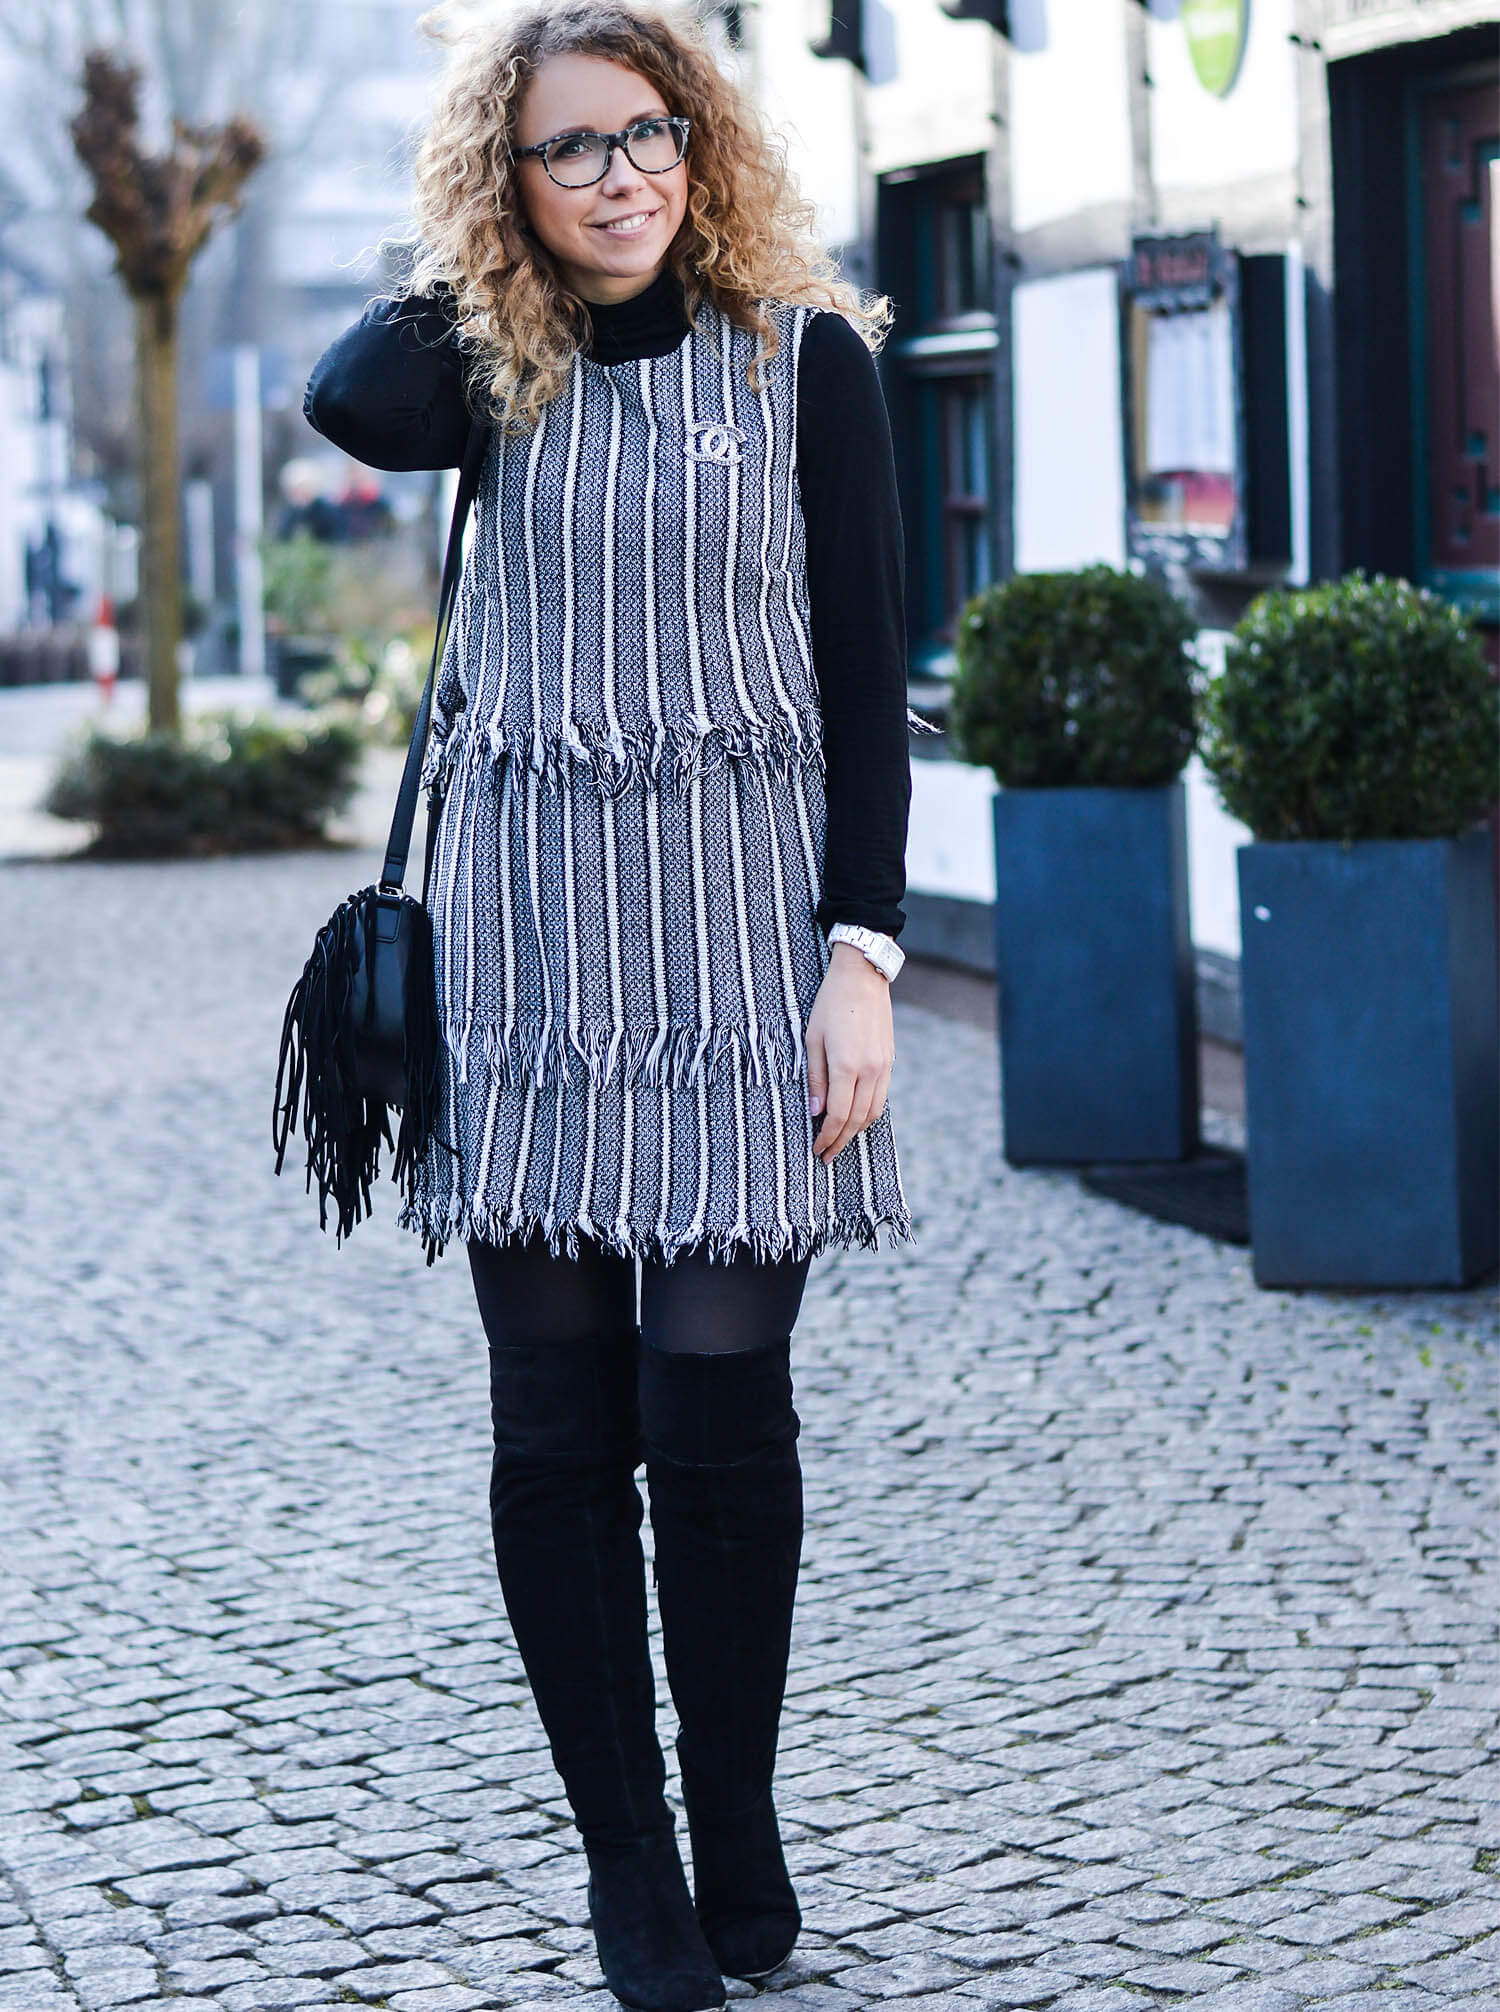 Kationette-fashionblog-nrw-outfit-Tweed-Dress-Chanel-Brooch-Overknees-streetstyle-curls